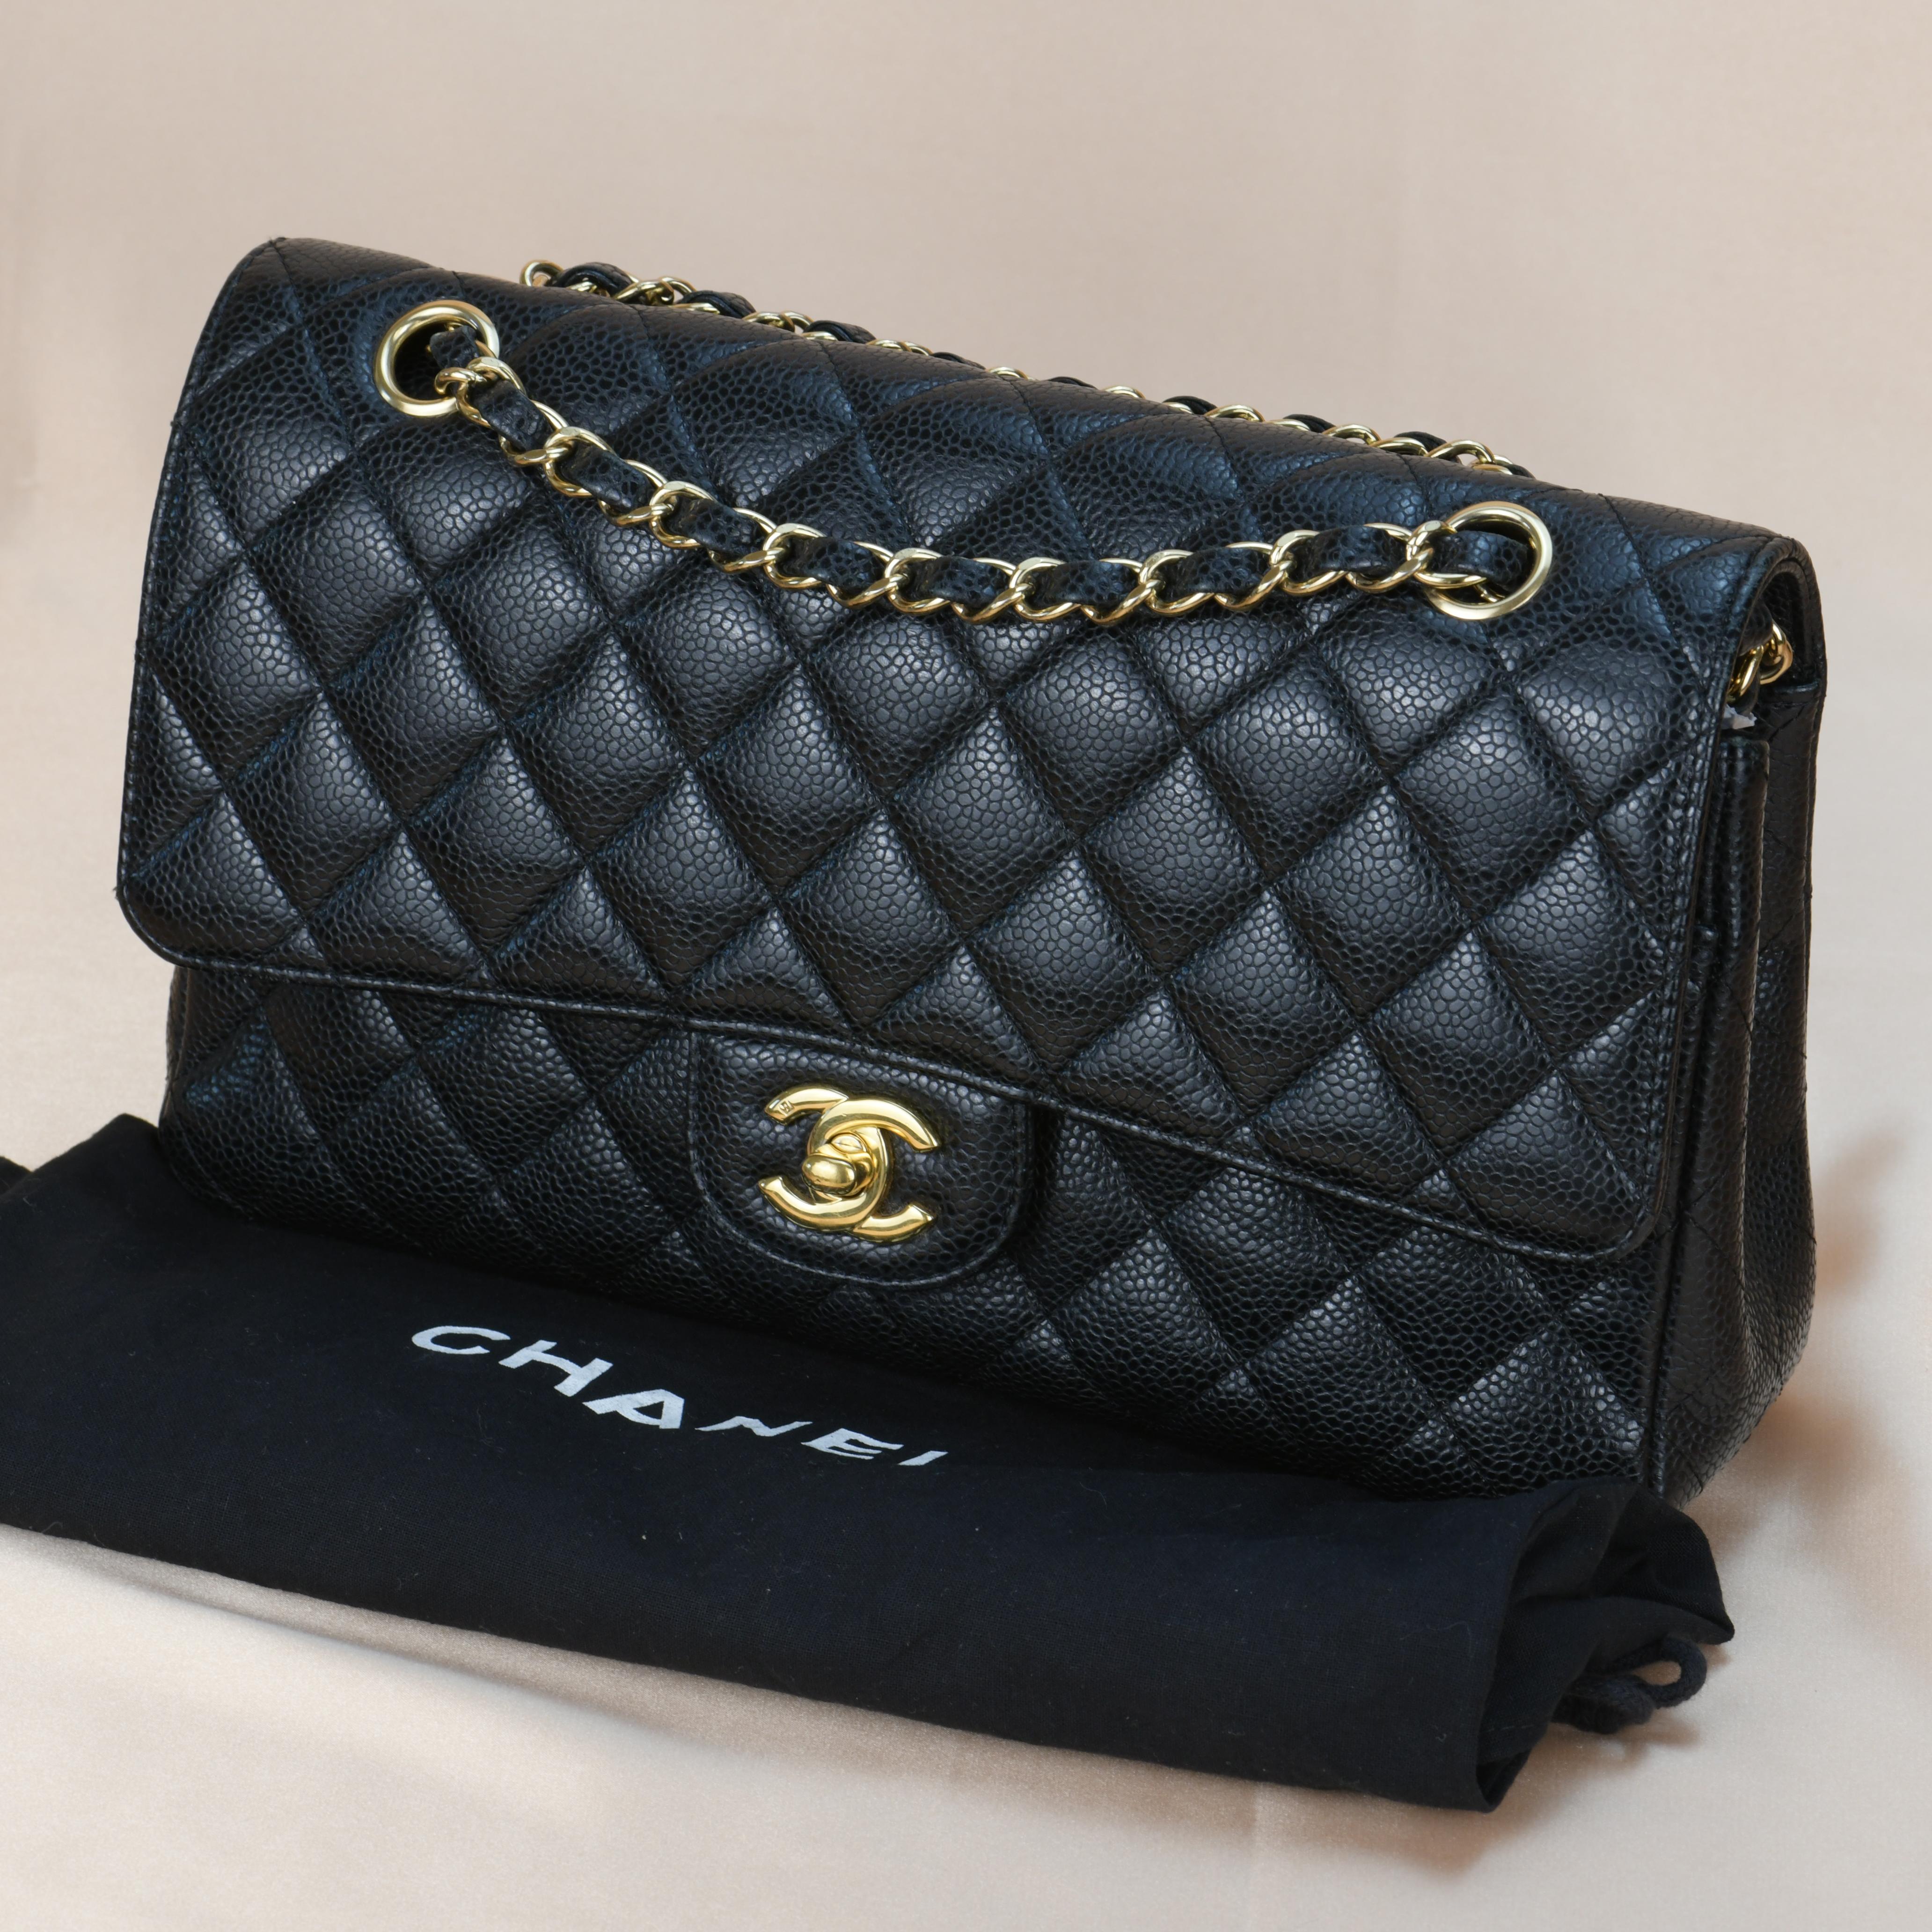 Dandelion Code	AT-1099
Brand	Chanel
Model	Timeless Classic Double Flap 
Serial No.	13******
Color	Black
Date	Approx. 2010
Metal	Gold
Material	Calfskin Caviar Leather
Measurements	Approx. 10in x 6in x 2.8in
Condition	Excellent 
Comes with	Chanel Dust